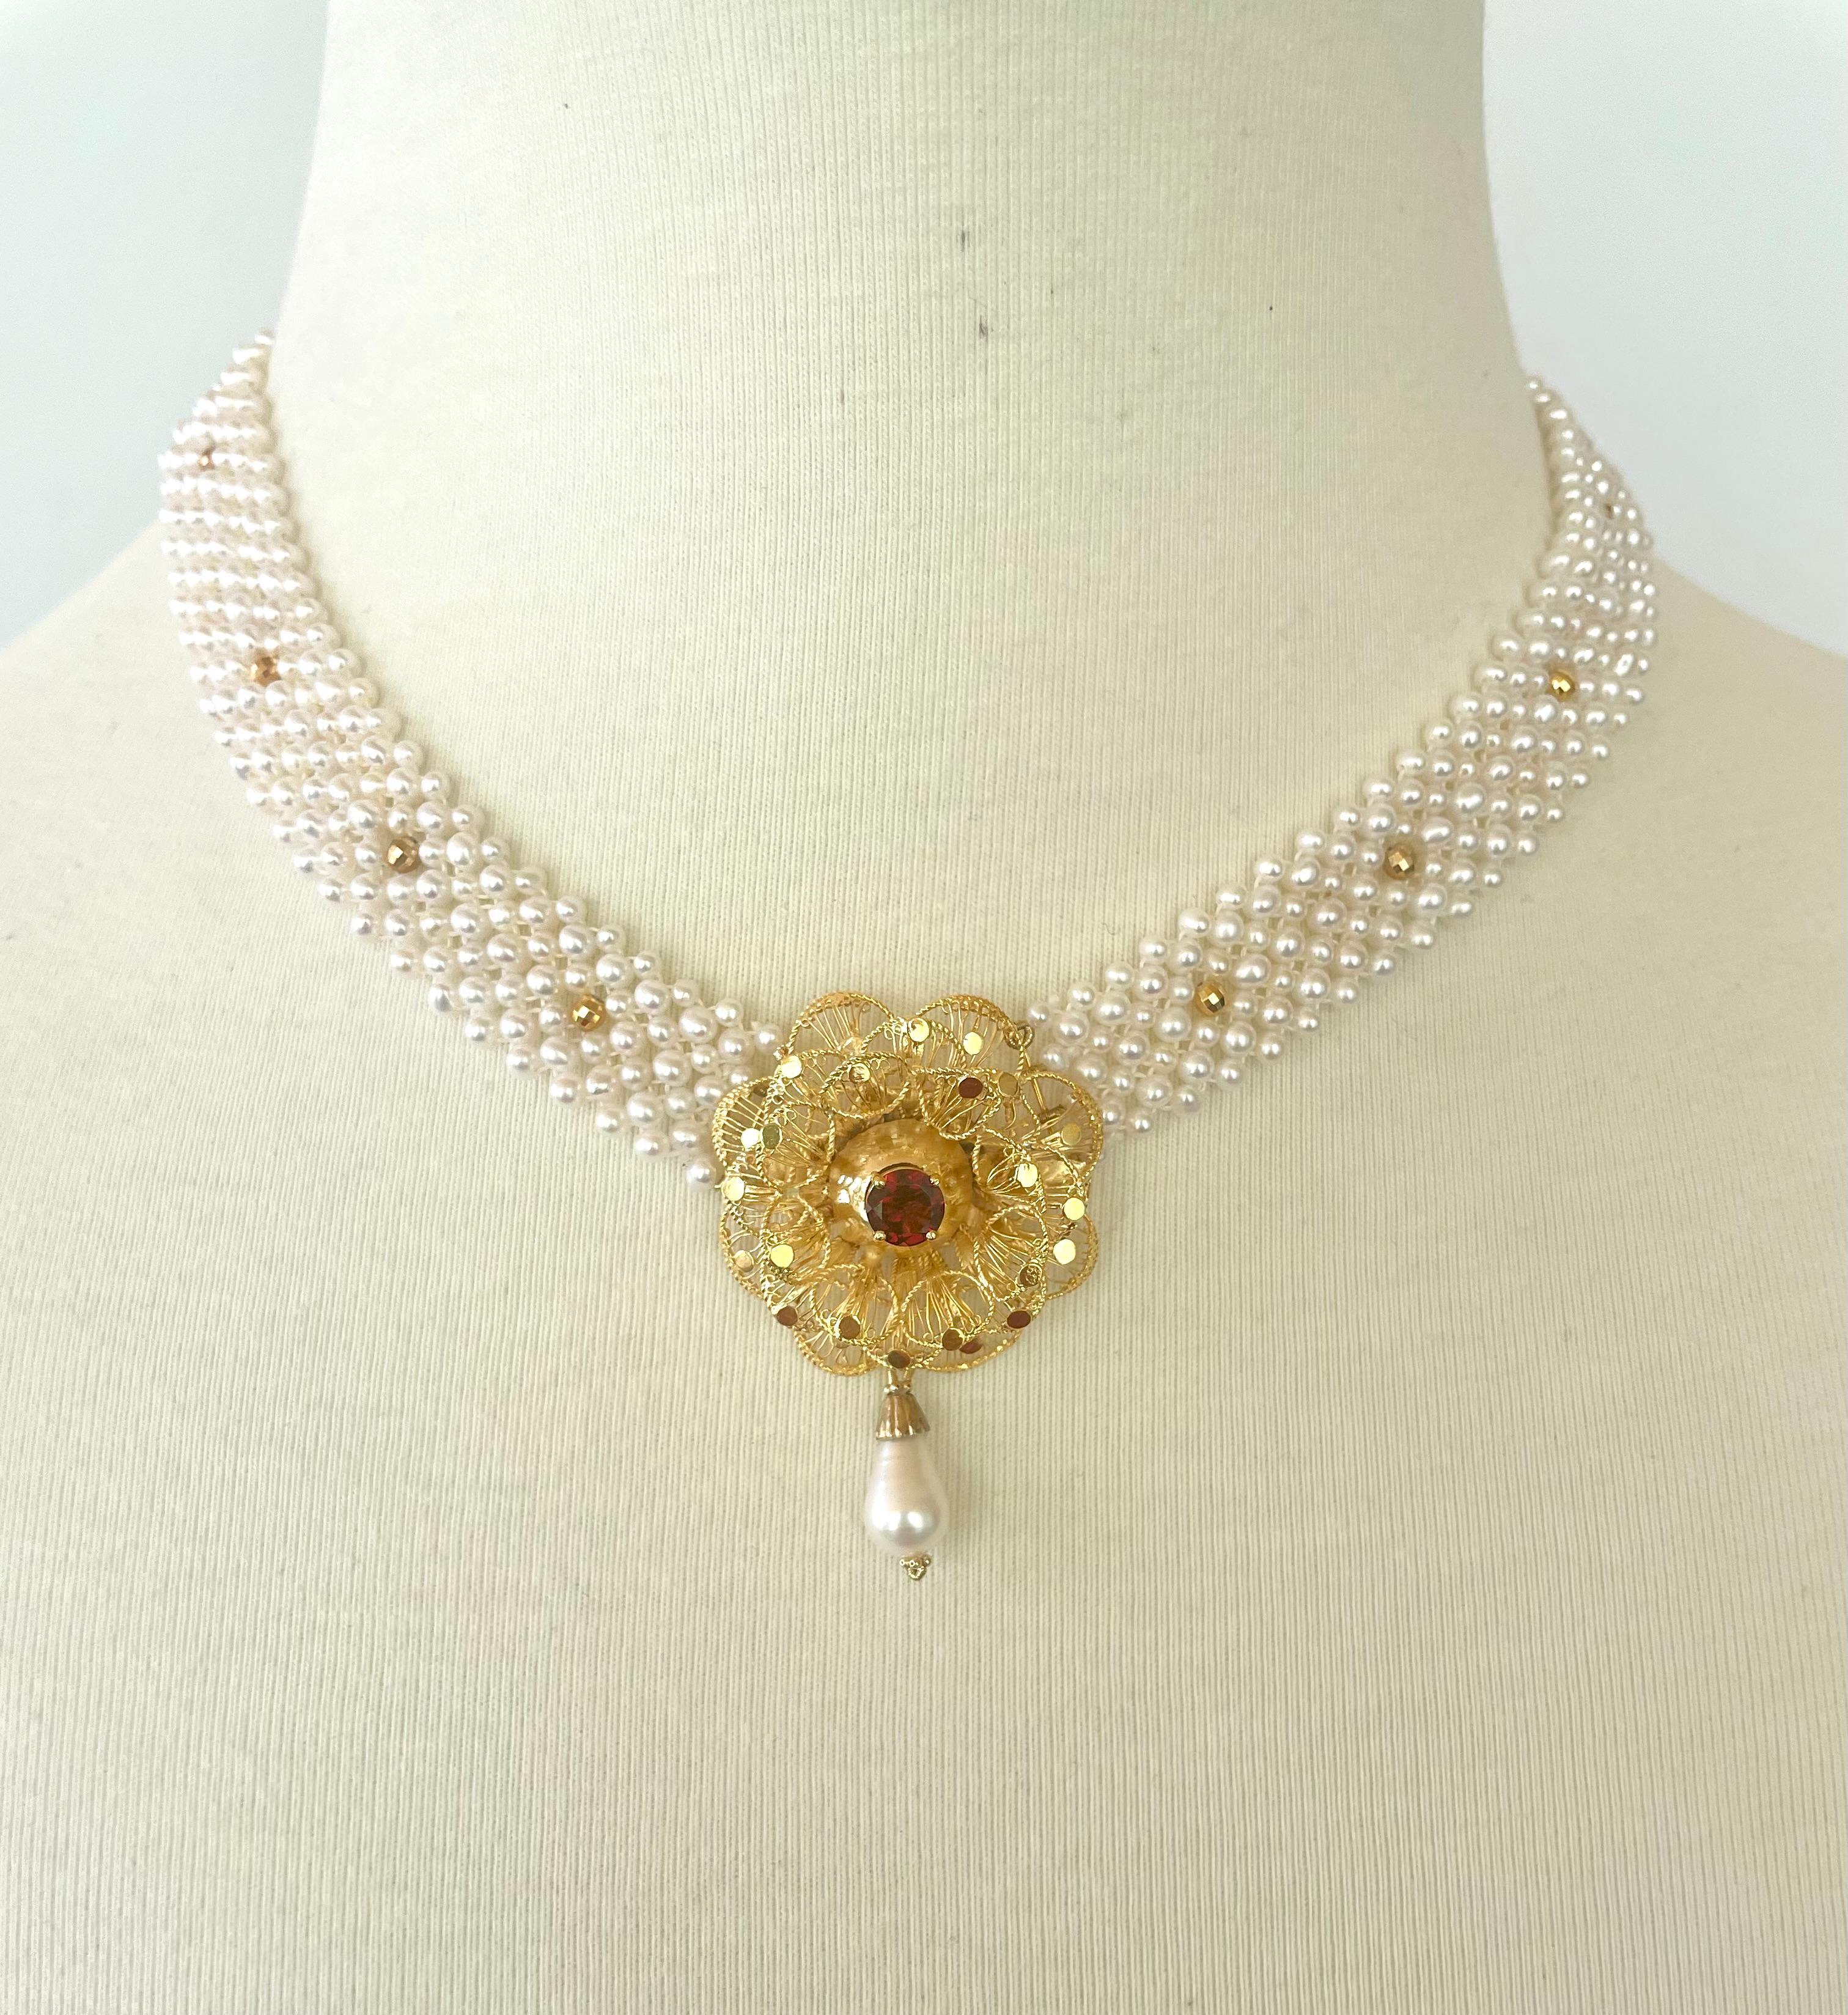 Beautiful Pearl Necklace by Marina J. This amazing piece features Cultured white Pearls all intricately woven together into a tight lace like design. Small gold-plated silver faceted beads are interwoven within the necklace. Vintage gold-plated